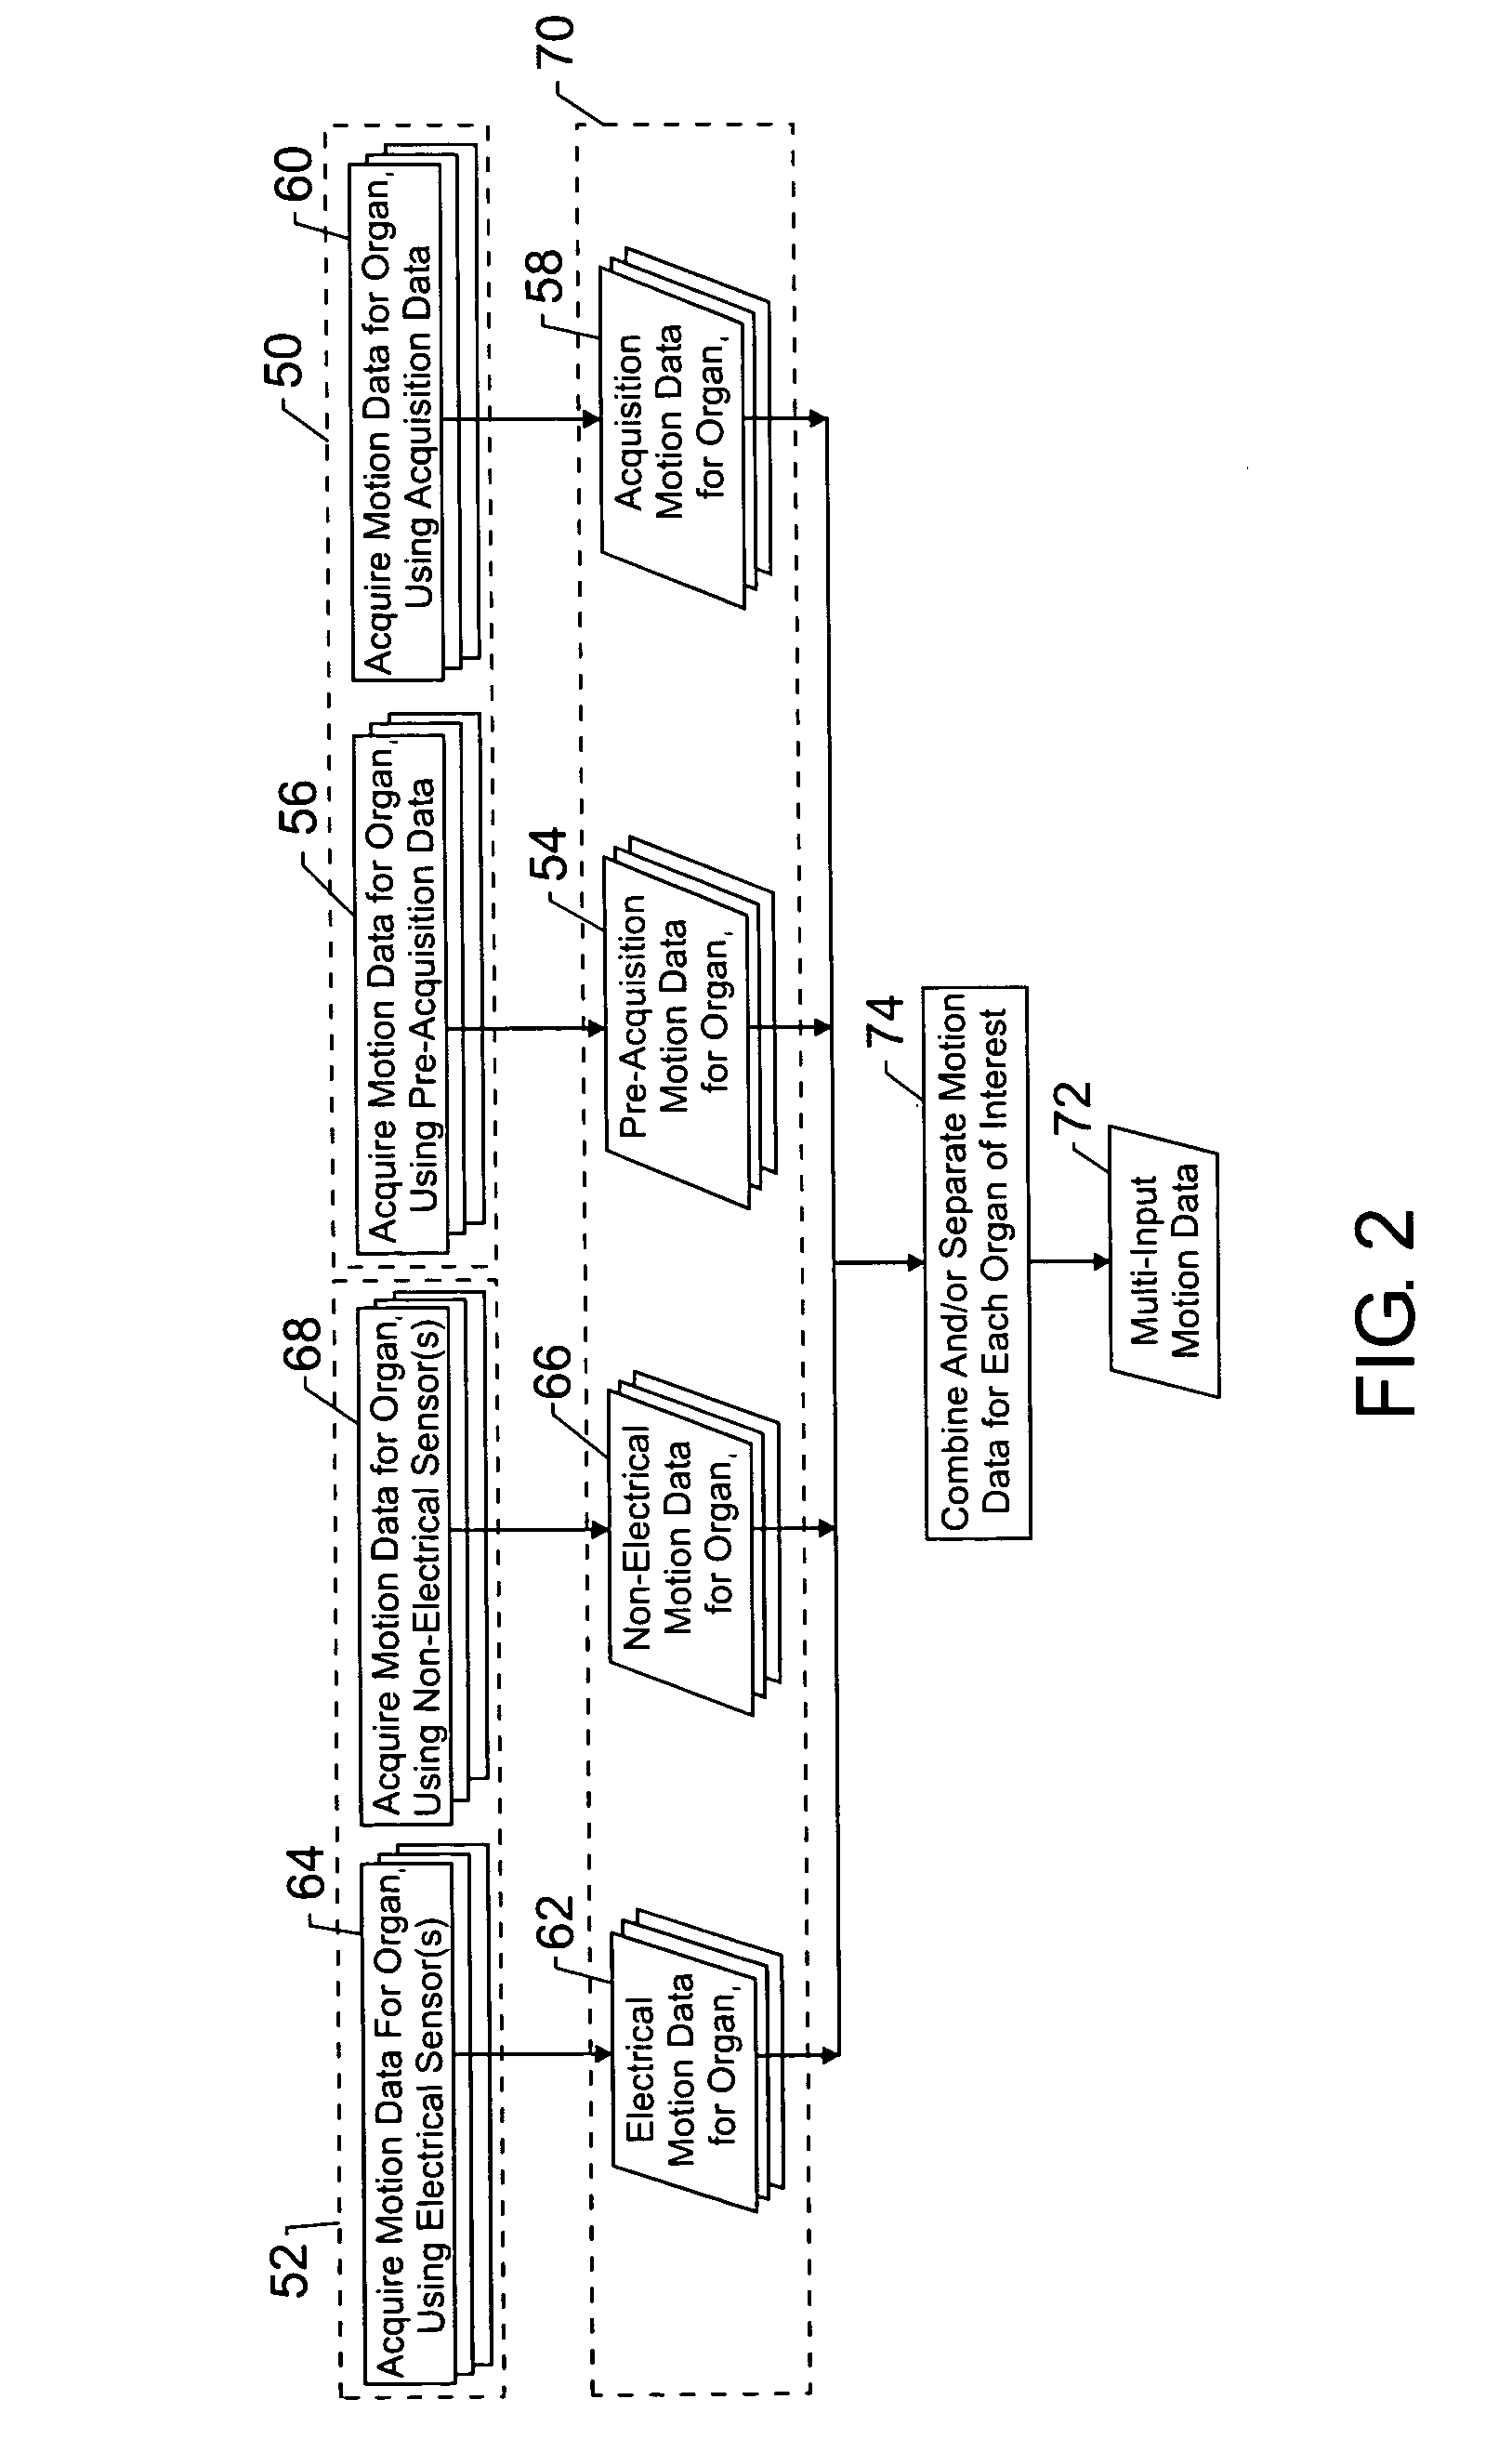 Method and system for composite gating using multiple inputs